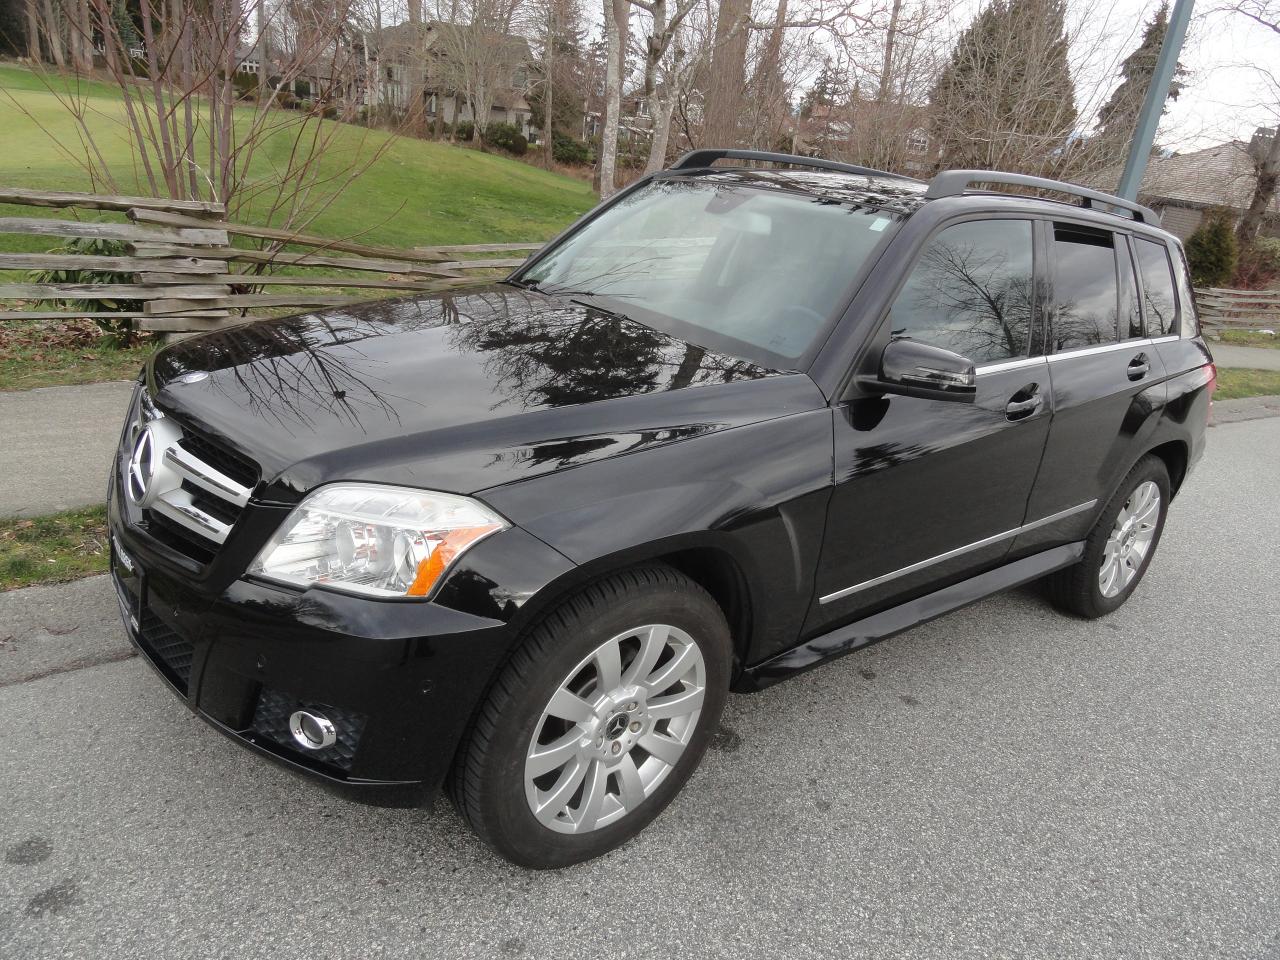 2010 Mercedes-Benz GLK350 4 MATIC -  DOC FEE ONLY $195.00 - Photo #1